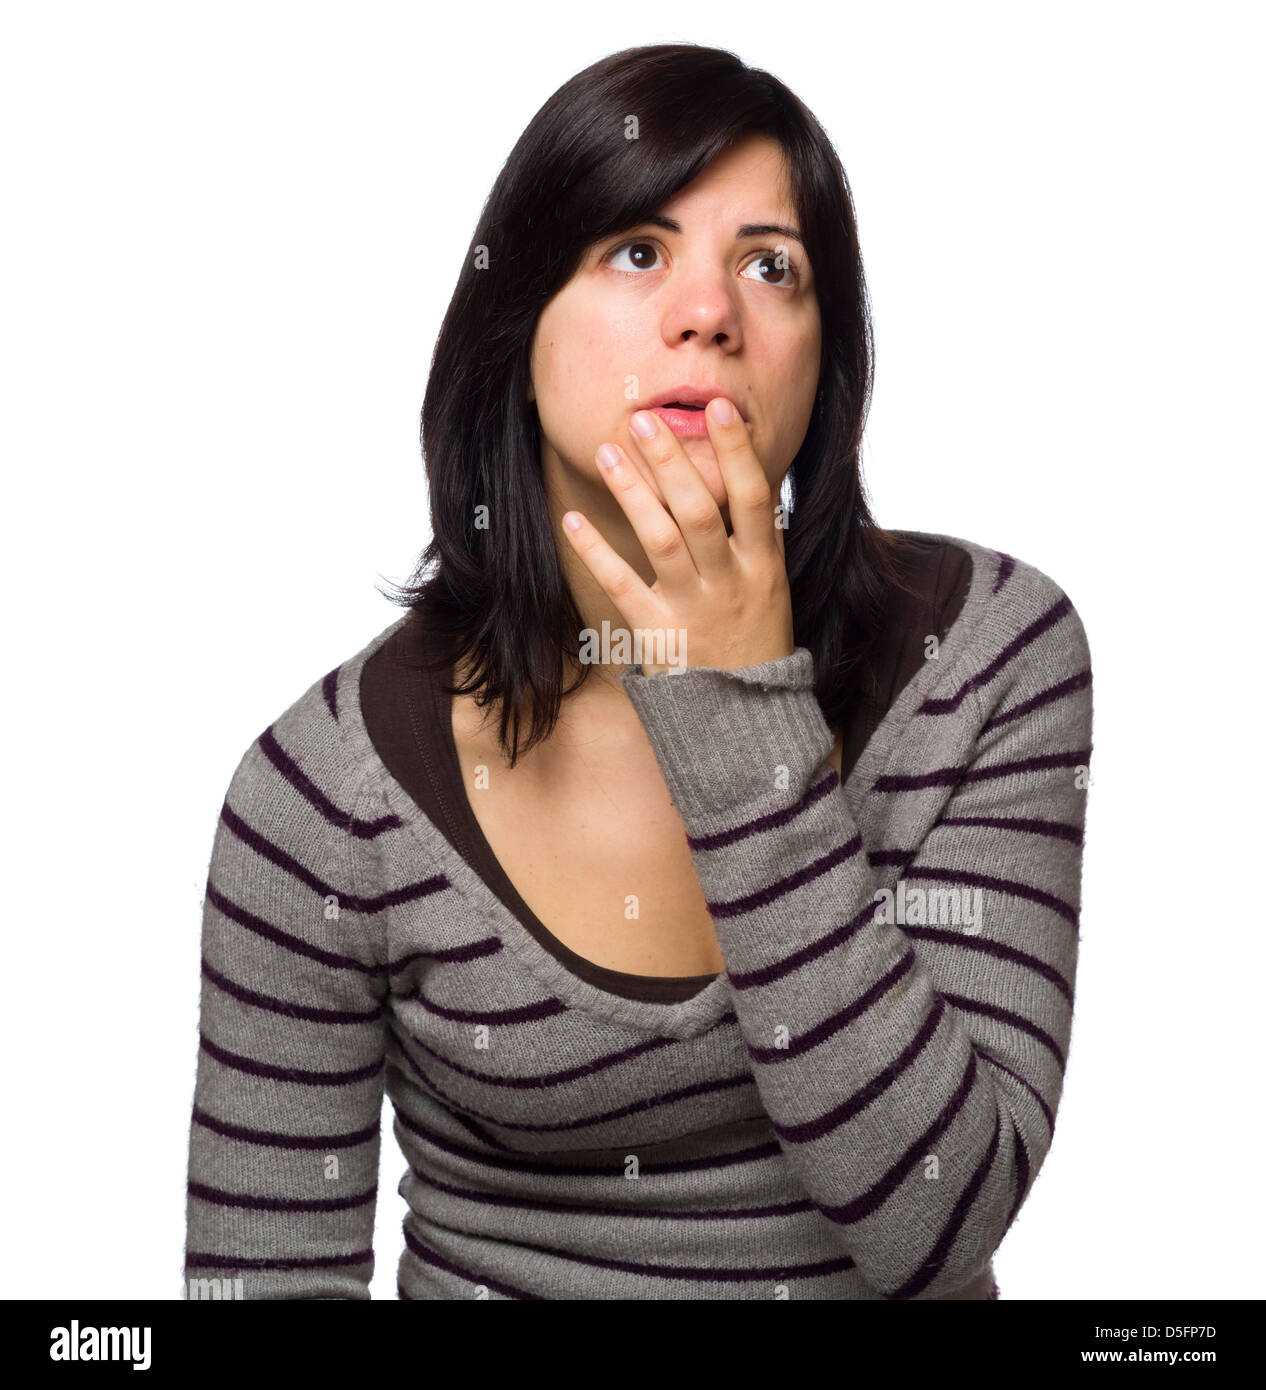 Portrait of pensive young woman with hand on chin isolated on white background Stock Photo